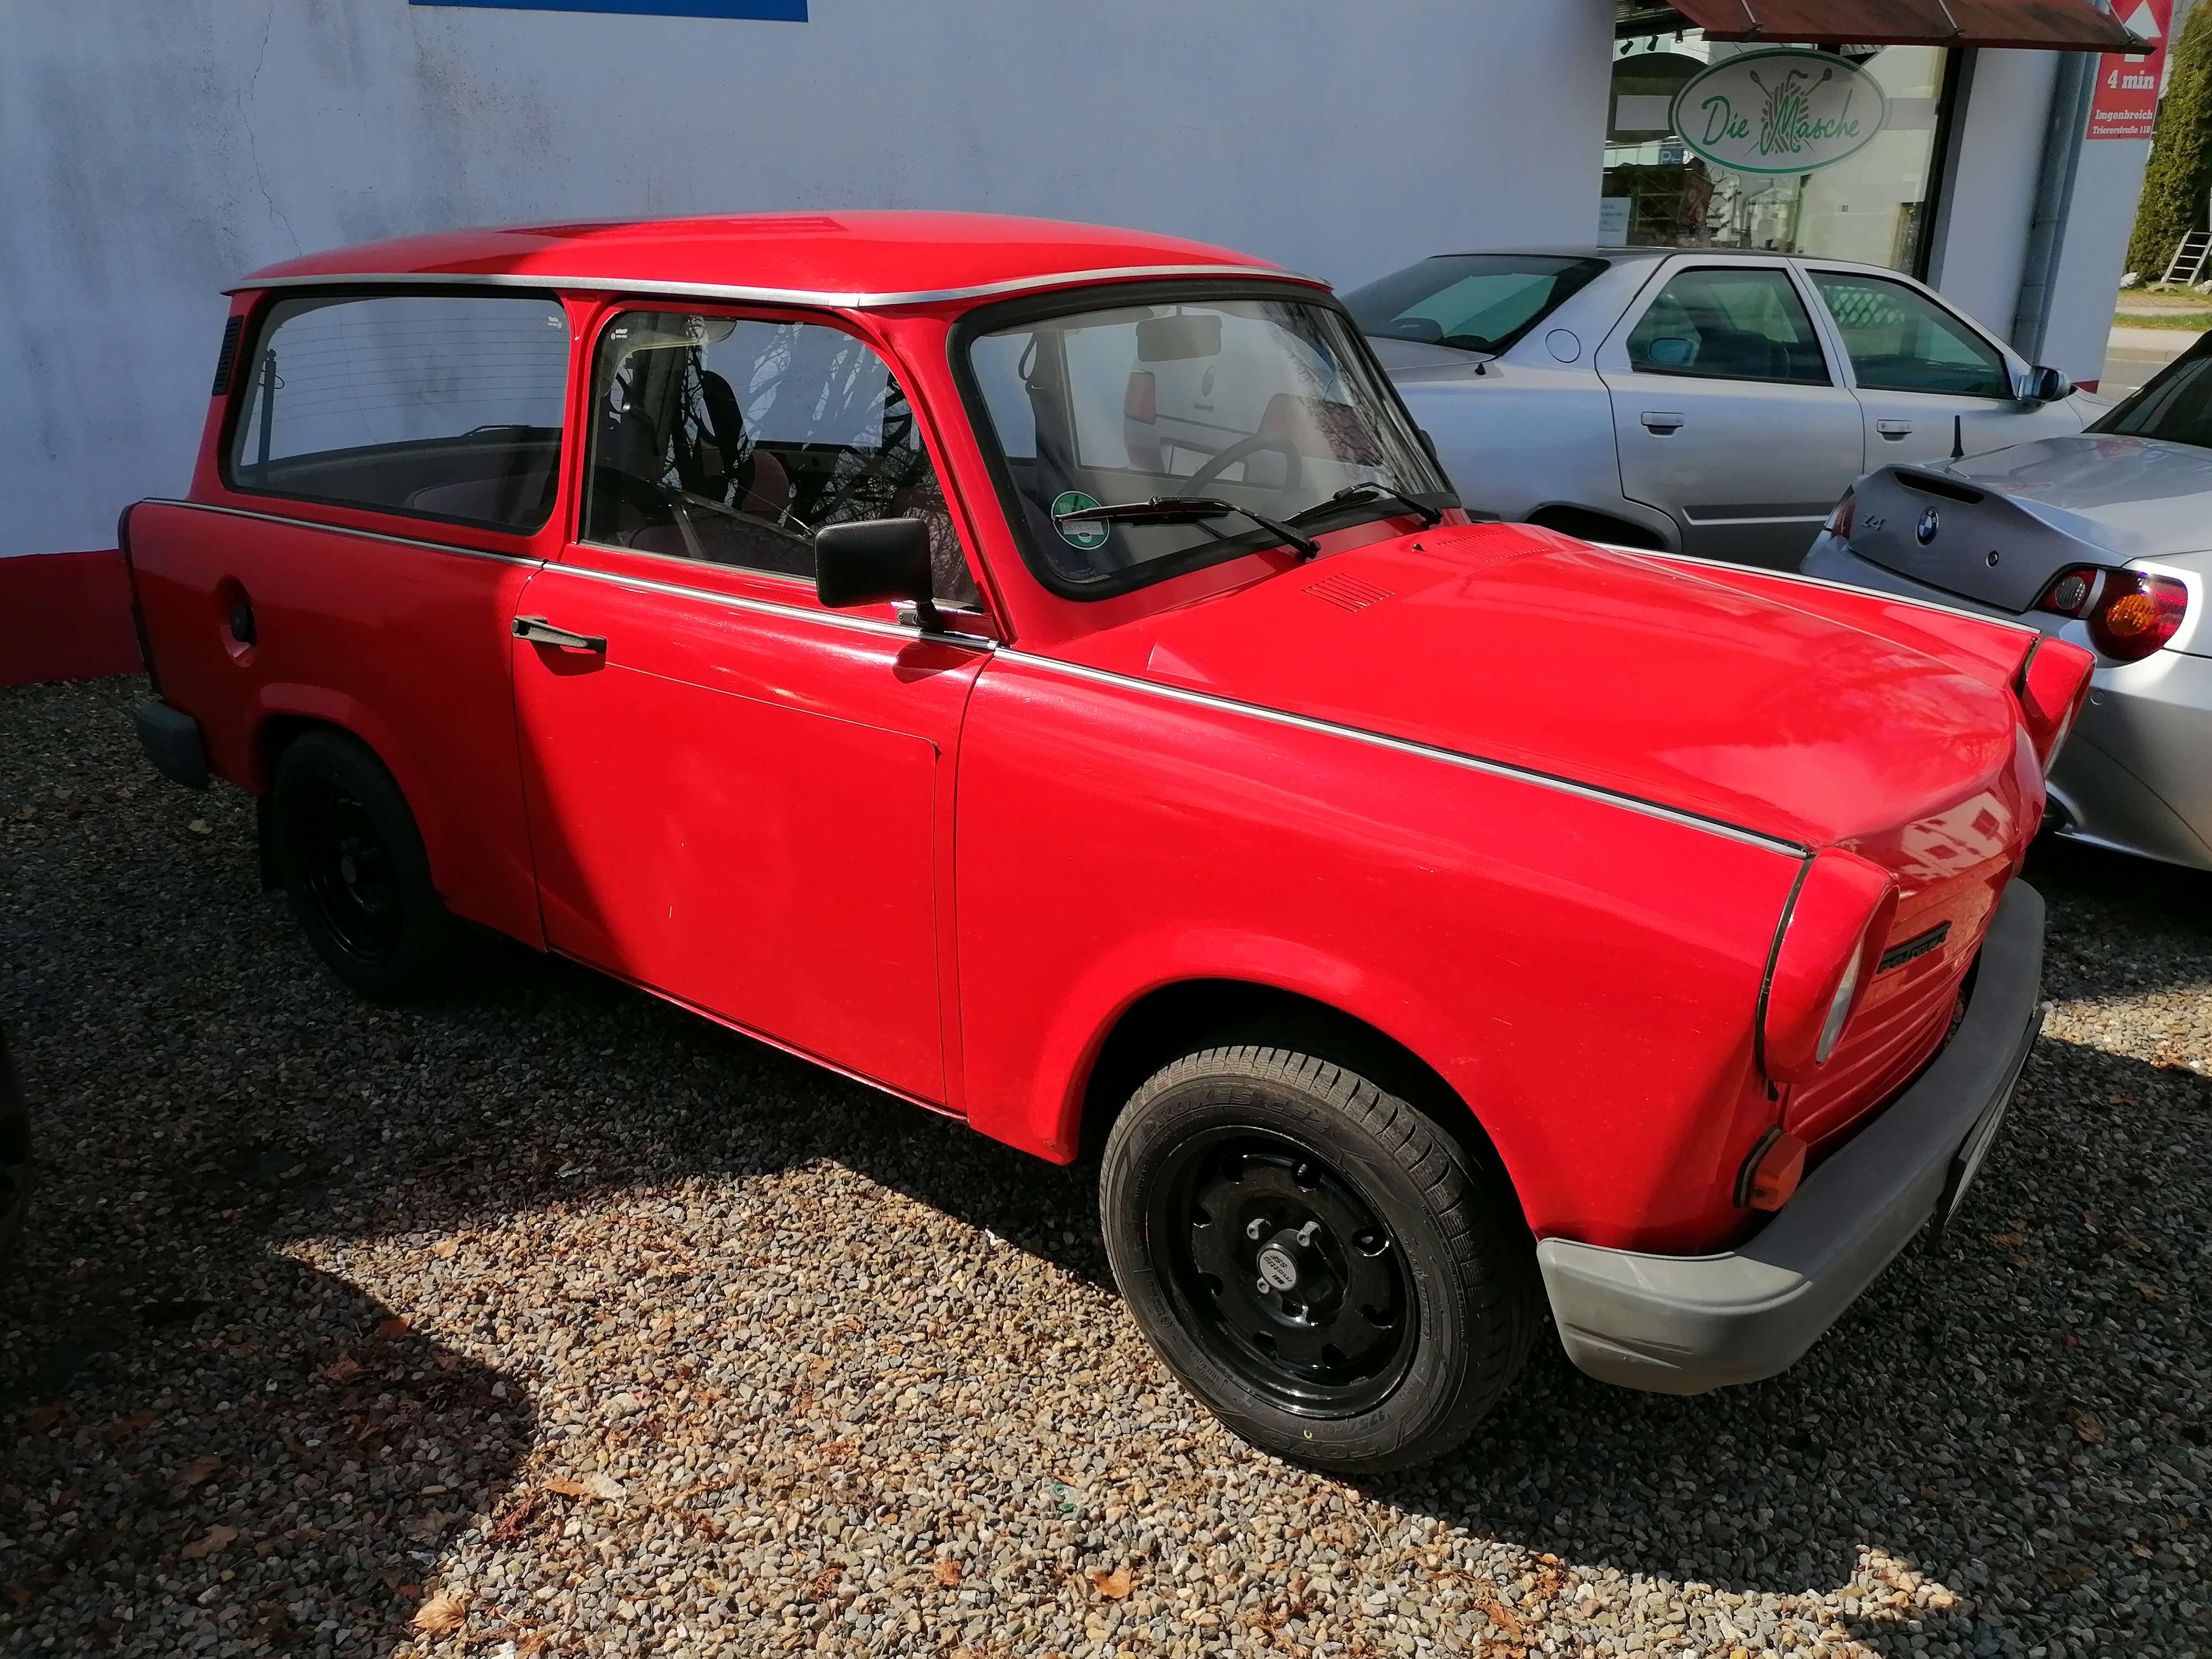 Trabant 1.1 Station wagon in Red used in Simmerath for € 5,500.-